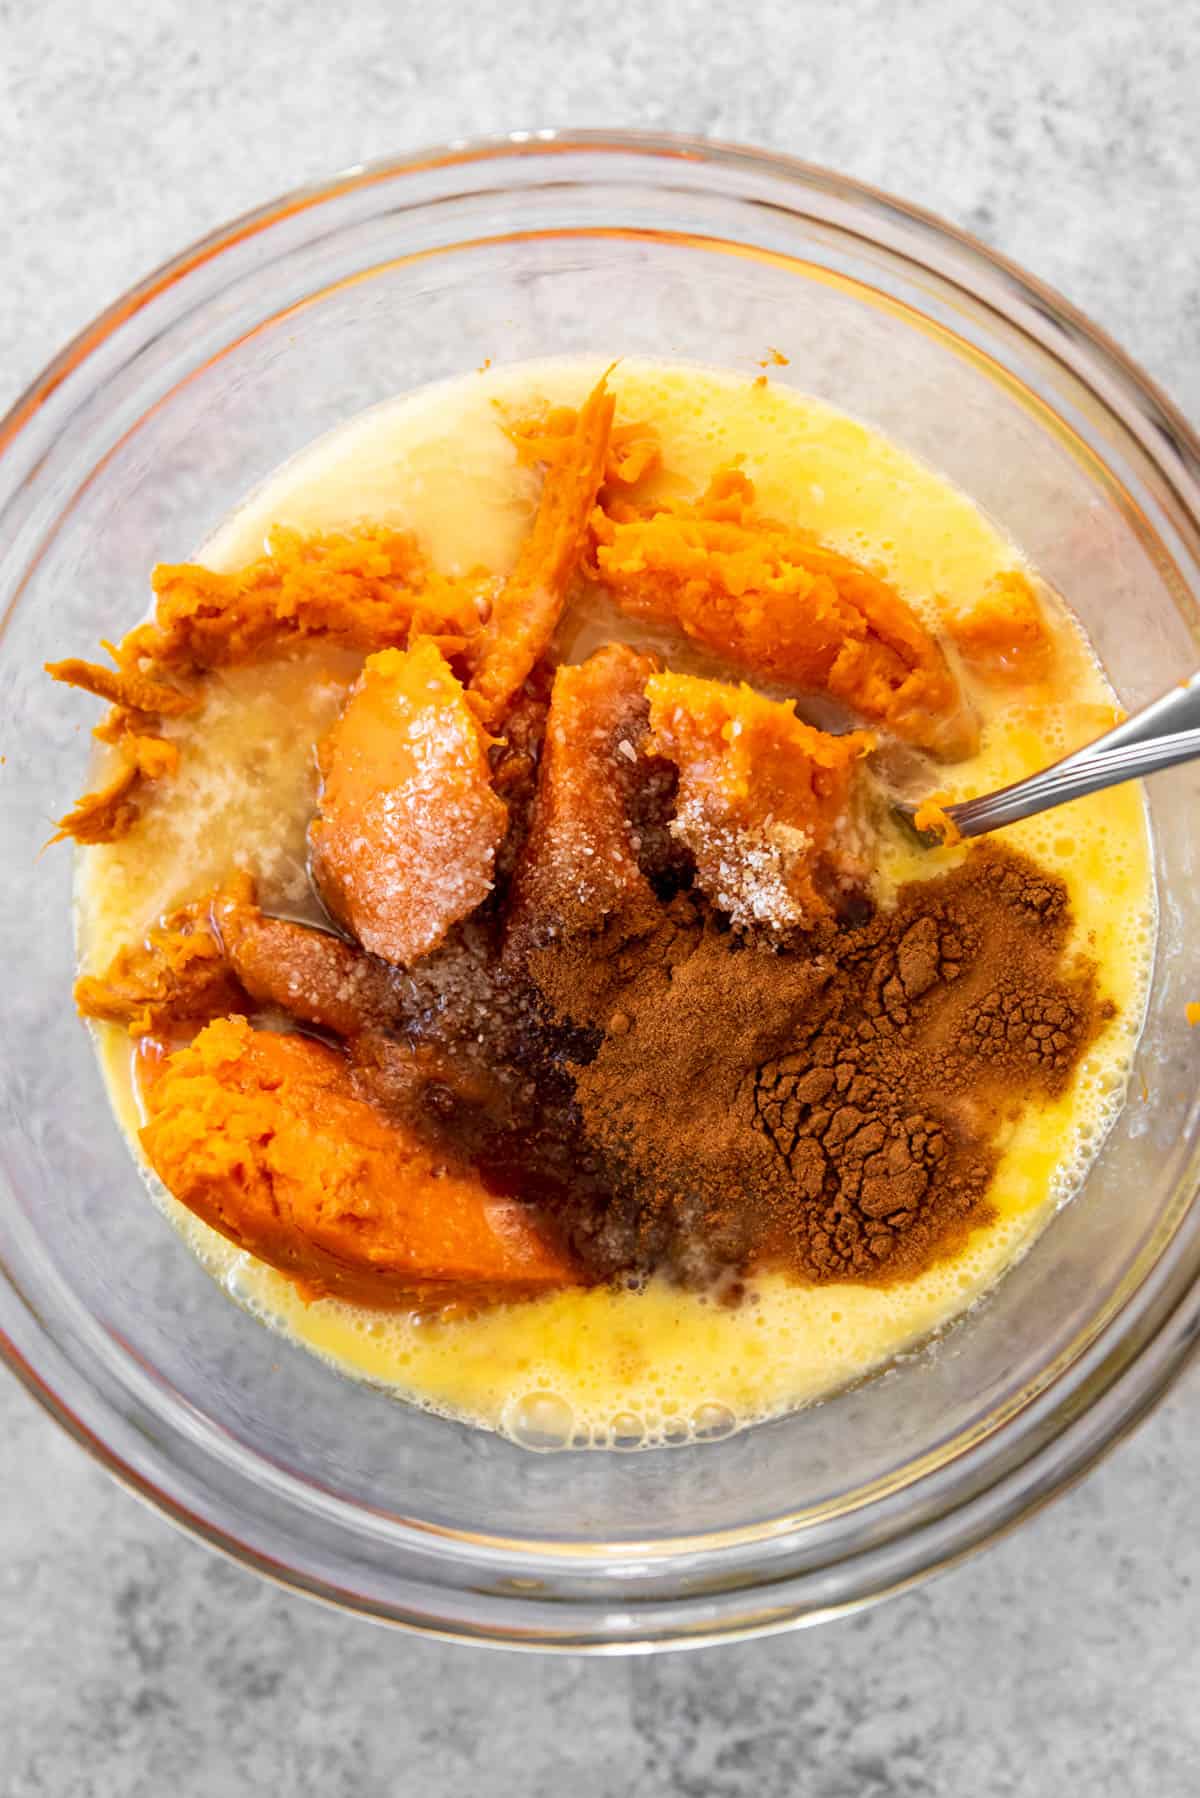 An image of the ingredients for sweet potato casserole in a bowl for mashing.